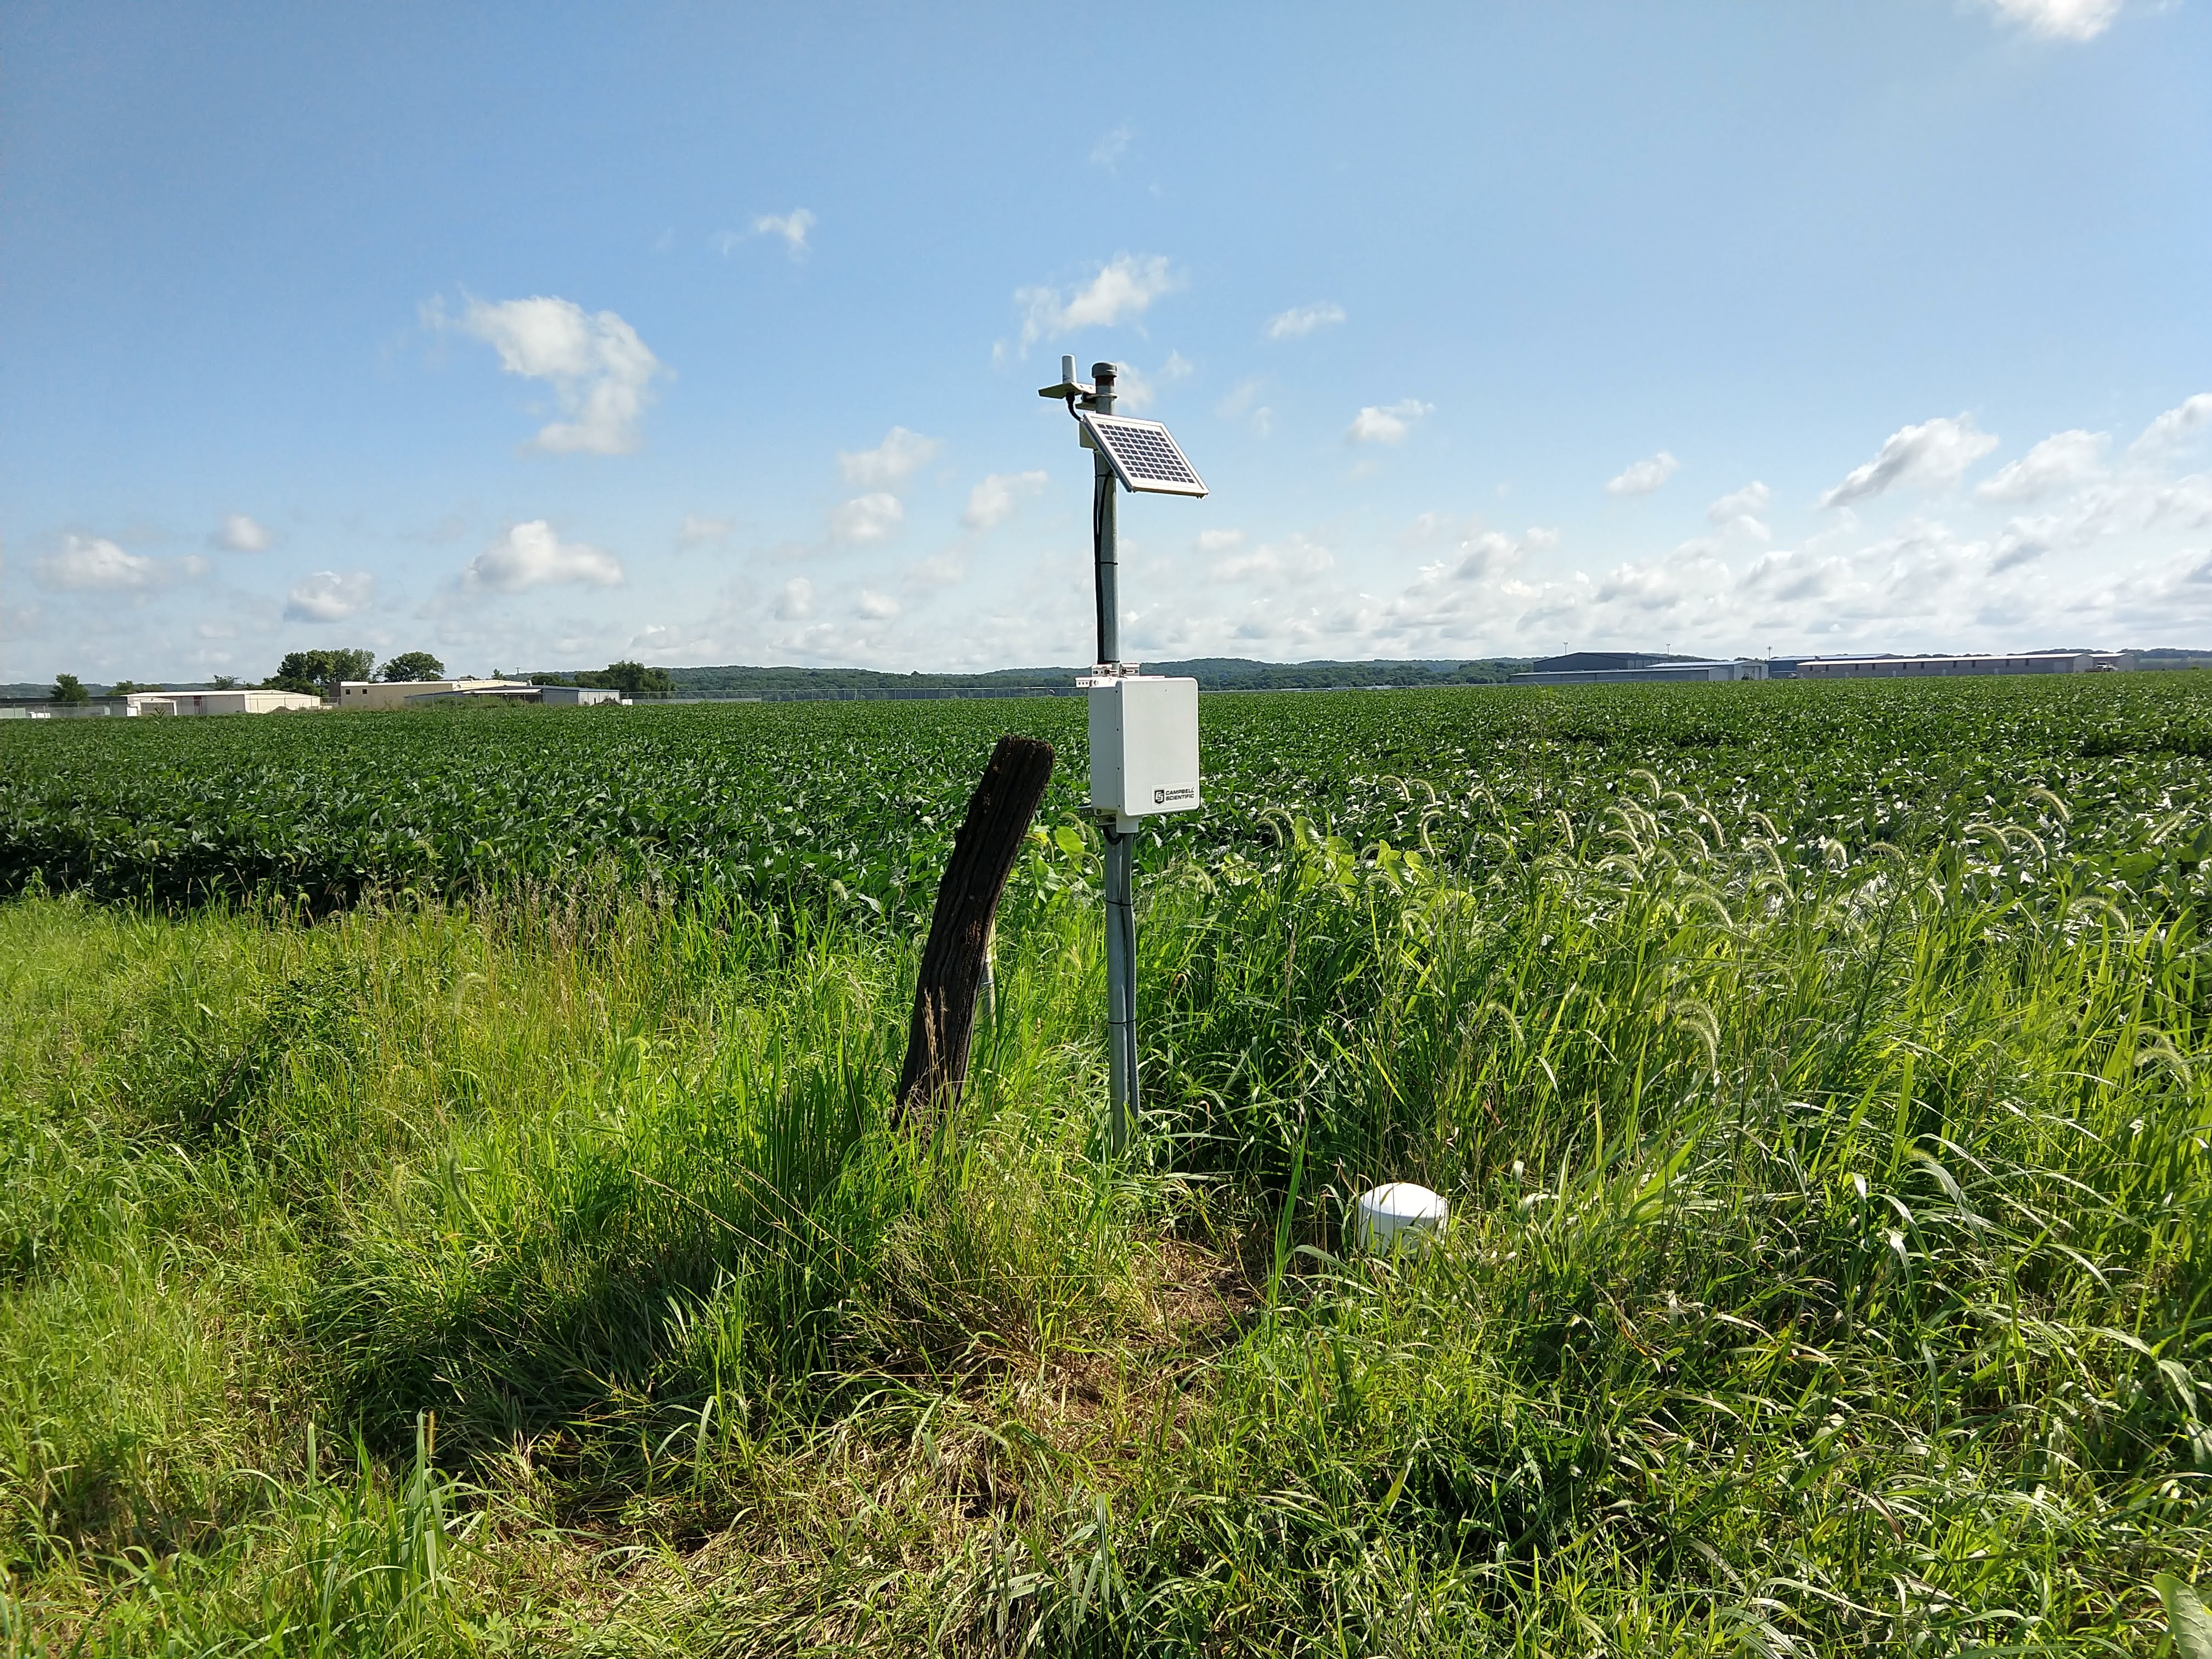 groundwater monitoring well near an agricultural field